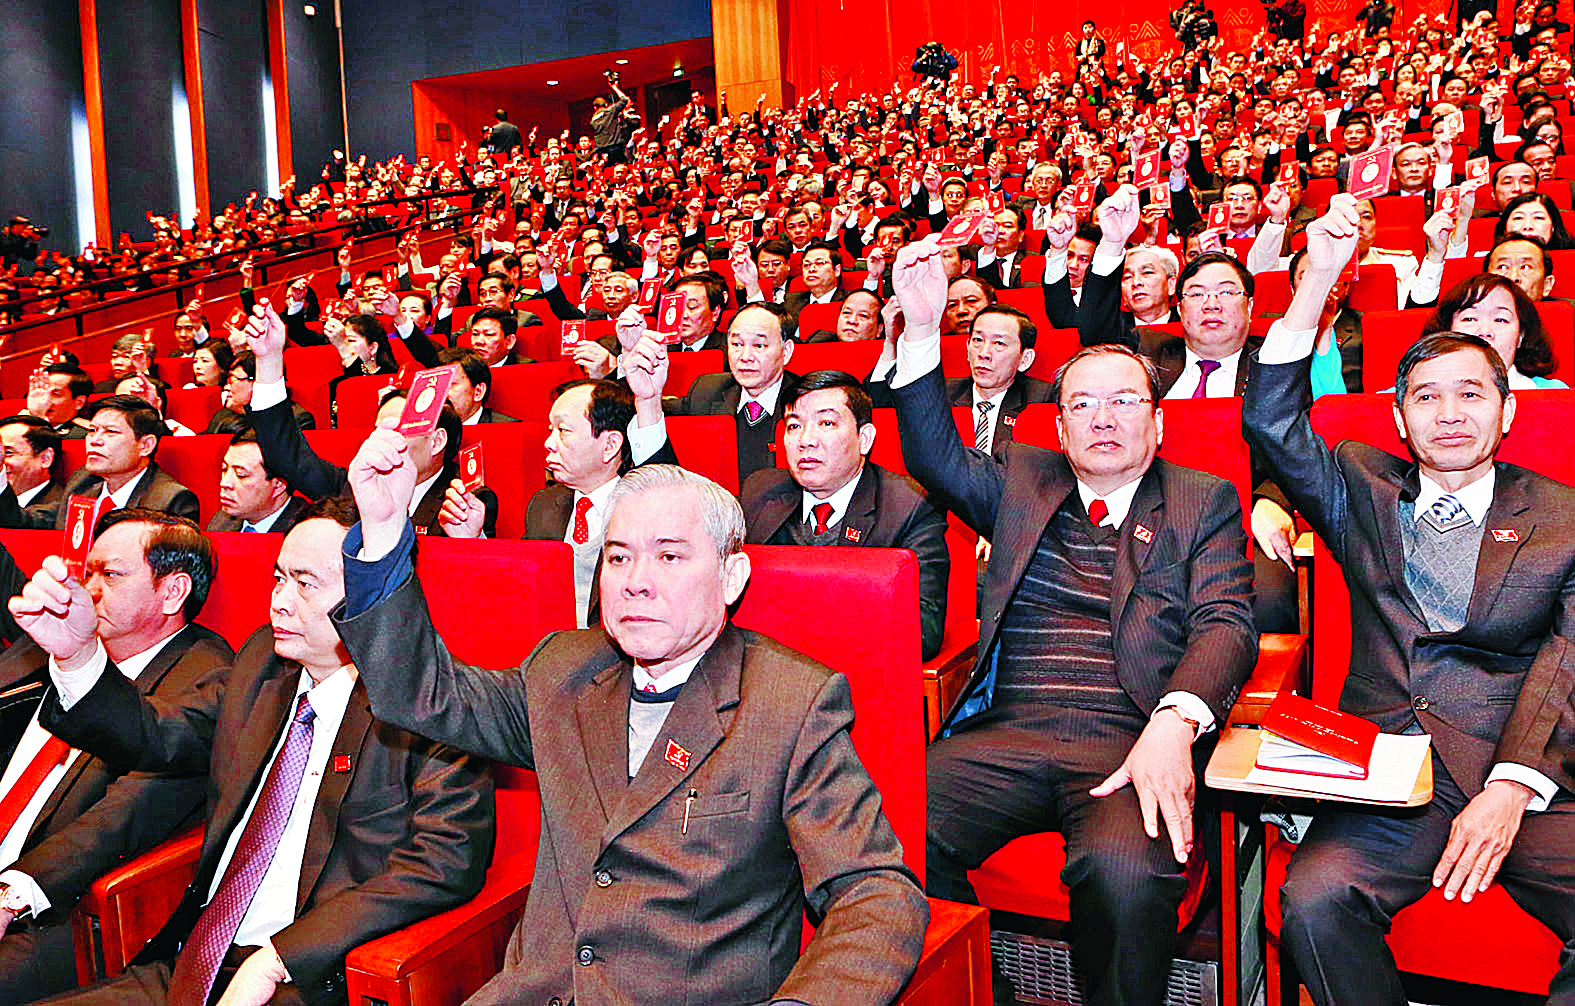 (160128) -- HANOI, Jan. 28, 2016 (Xinhua) -- Delegates vote to adopt a resolution of the 12th National Congress of the Communist Party of Vietnam (CPV) in Hanoi, capital of Vietnam, Jan. 28, 2016. 1,510 delegates representing over 4.5 million Communist Party of Vietnam (CPV) members attended the congress. (Xinhua/VNA)